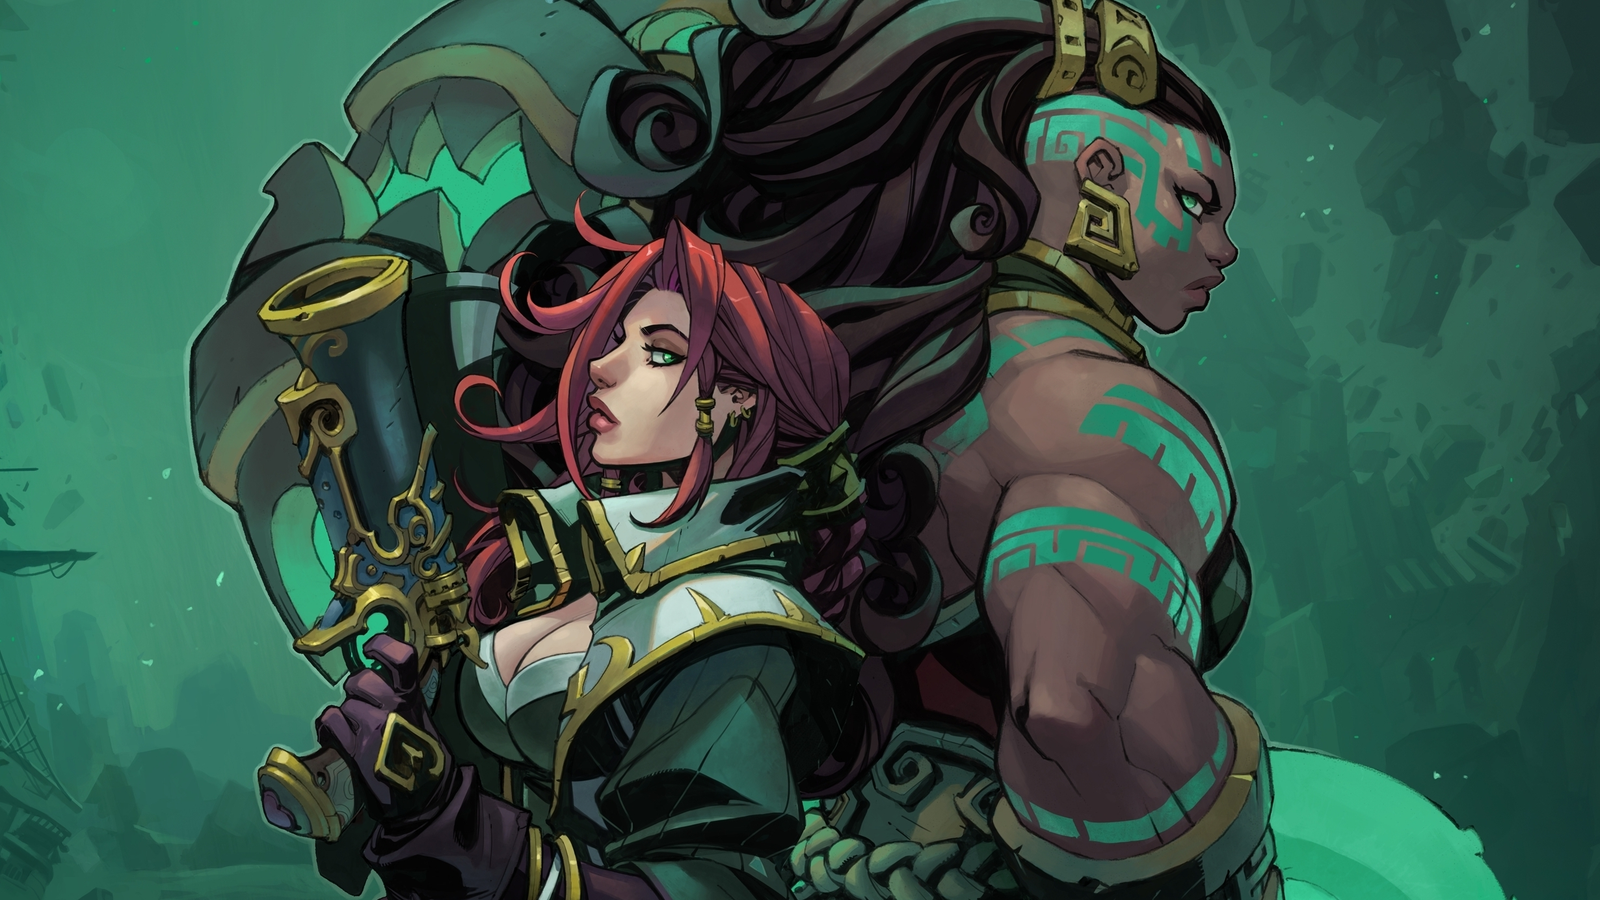 League Of Legends' New Champion Illaoi Now Has Her Own Game